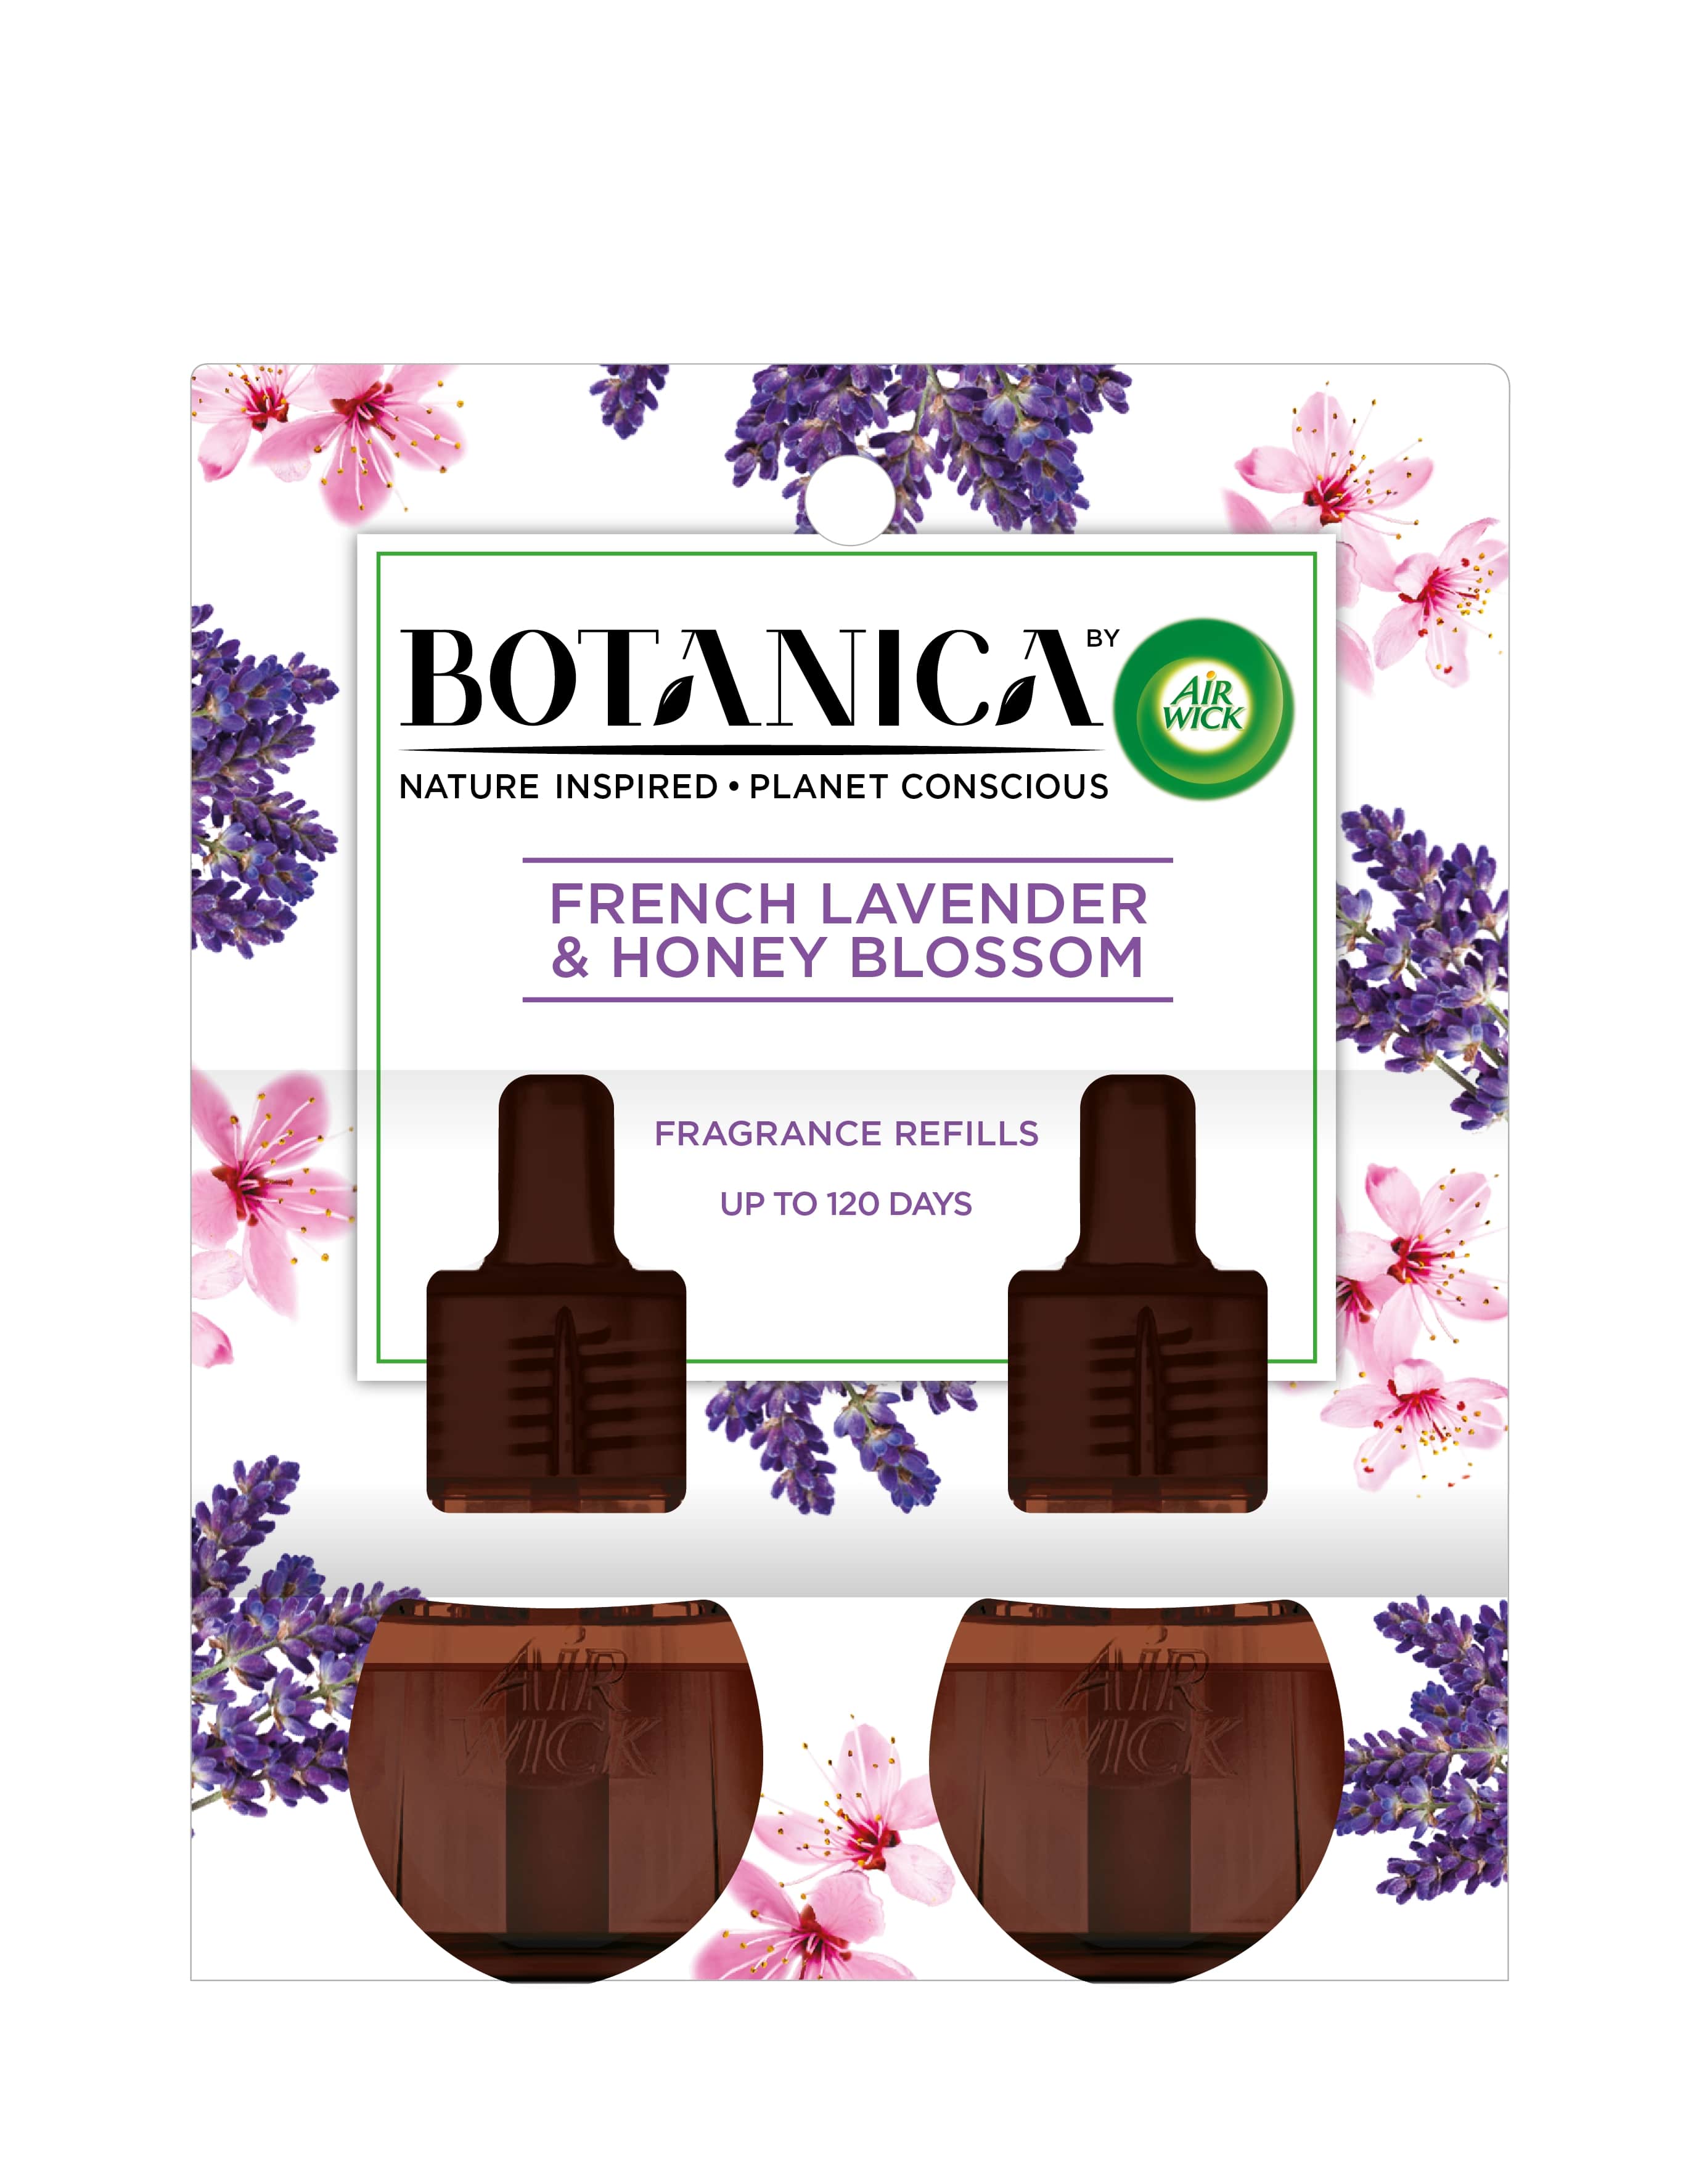 AIR WICK® Botanica Scented Oil - French Lavender & Honey Blossom 